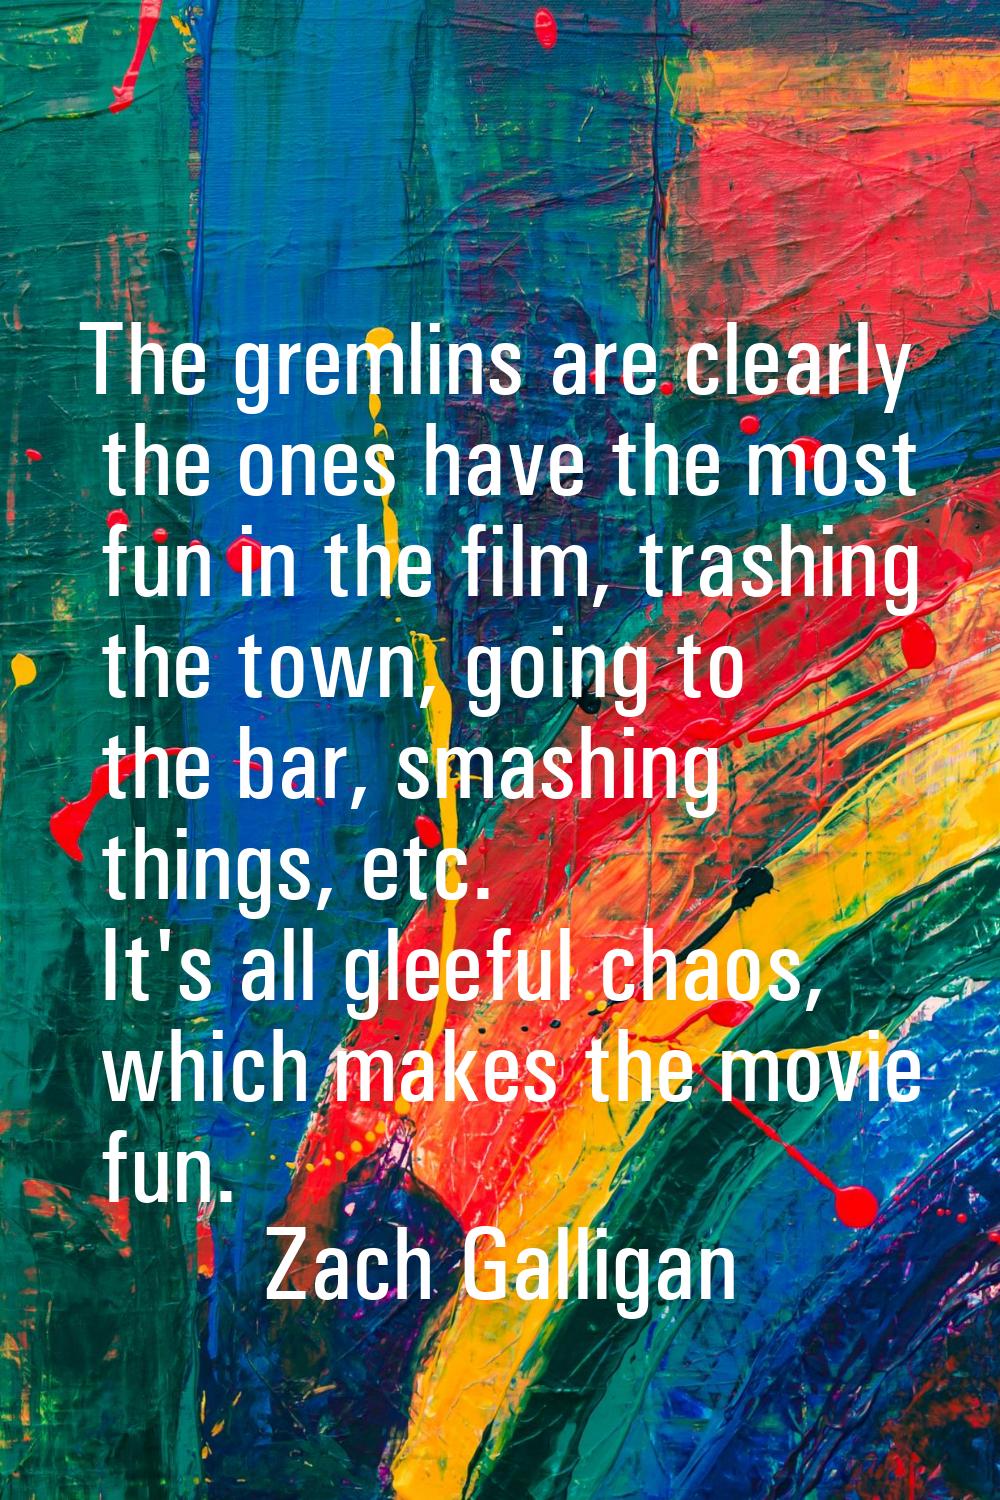 The gremlins are clearly the ones have the most fun in the film, trashing the town, going to the ba